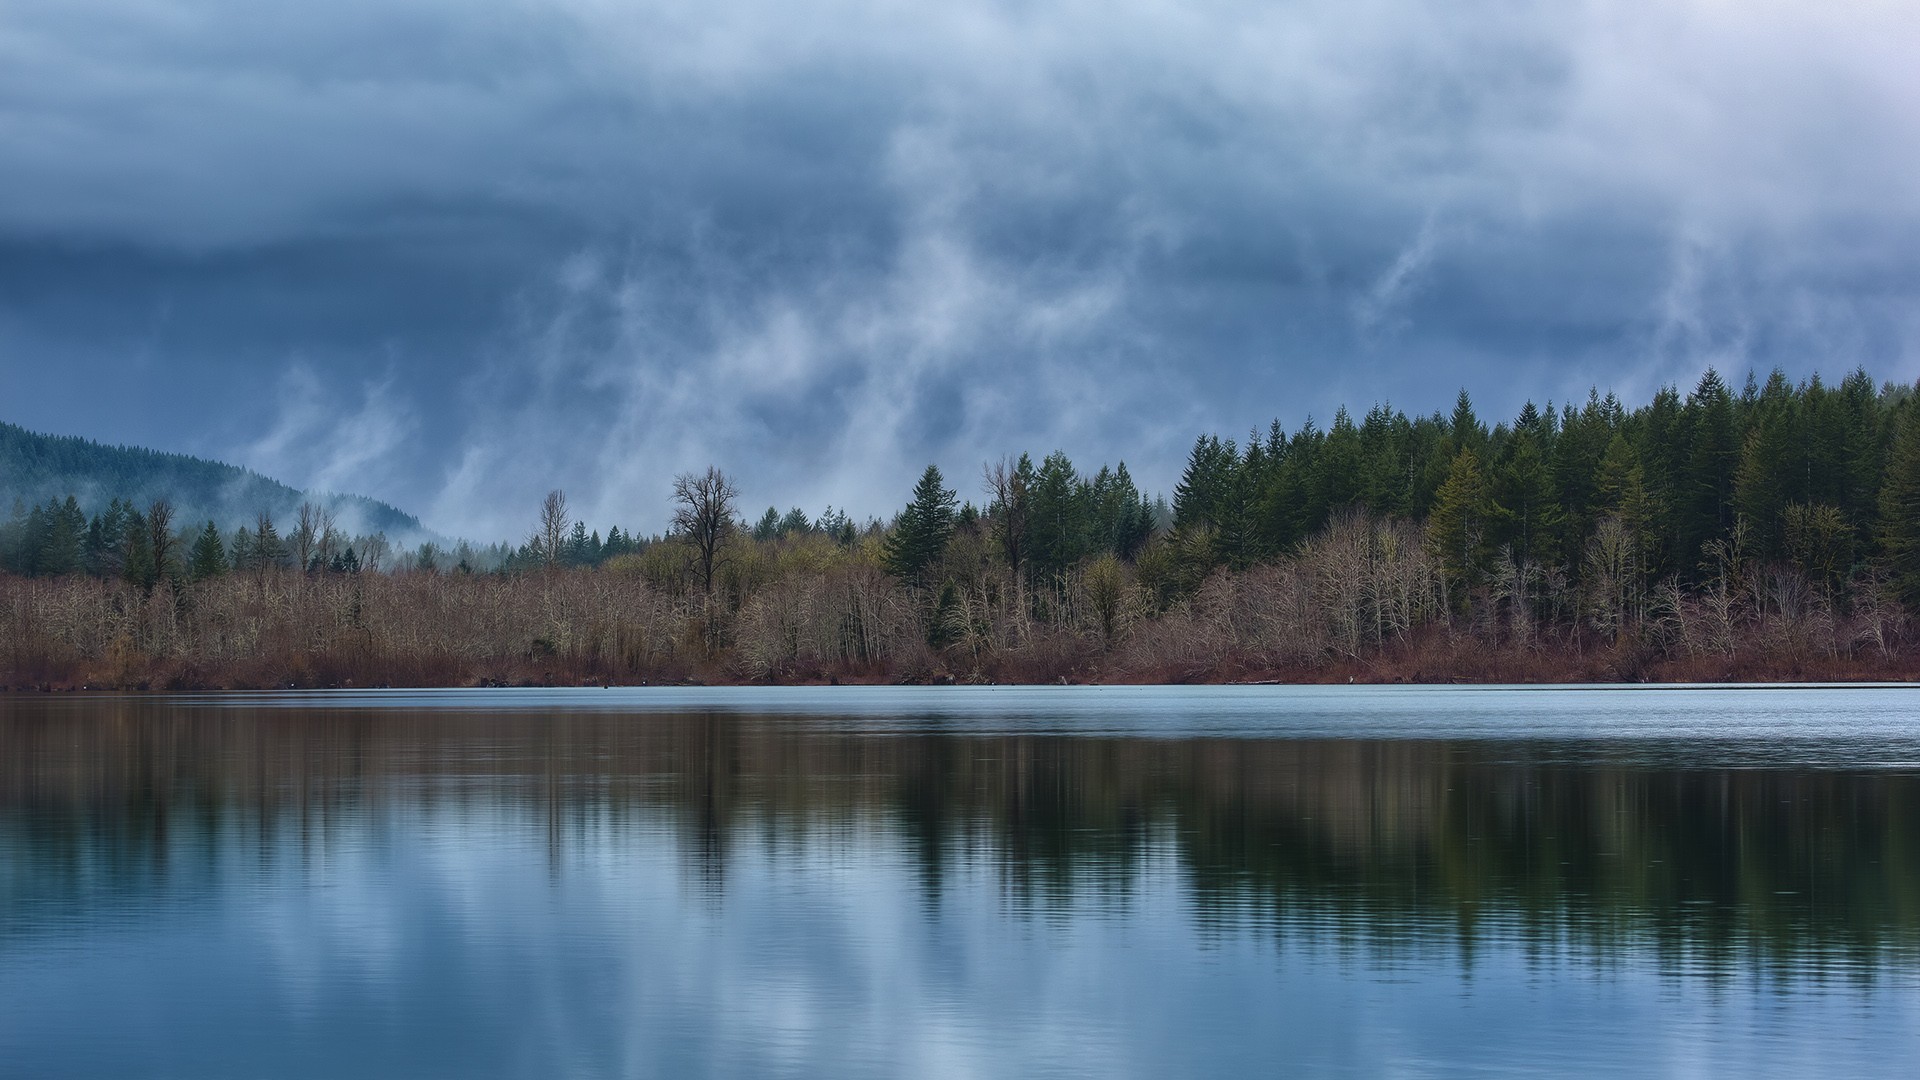 General 1920x1080 lake clouds trees mist nature landscape calm waters